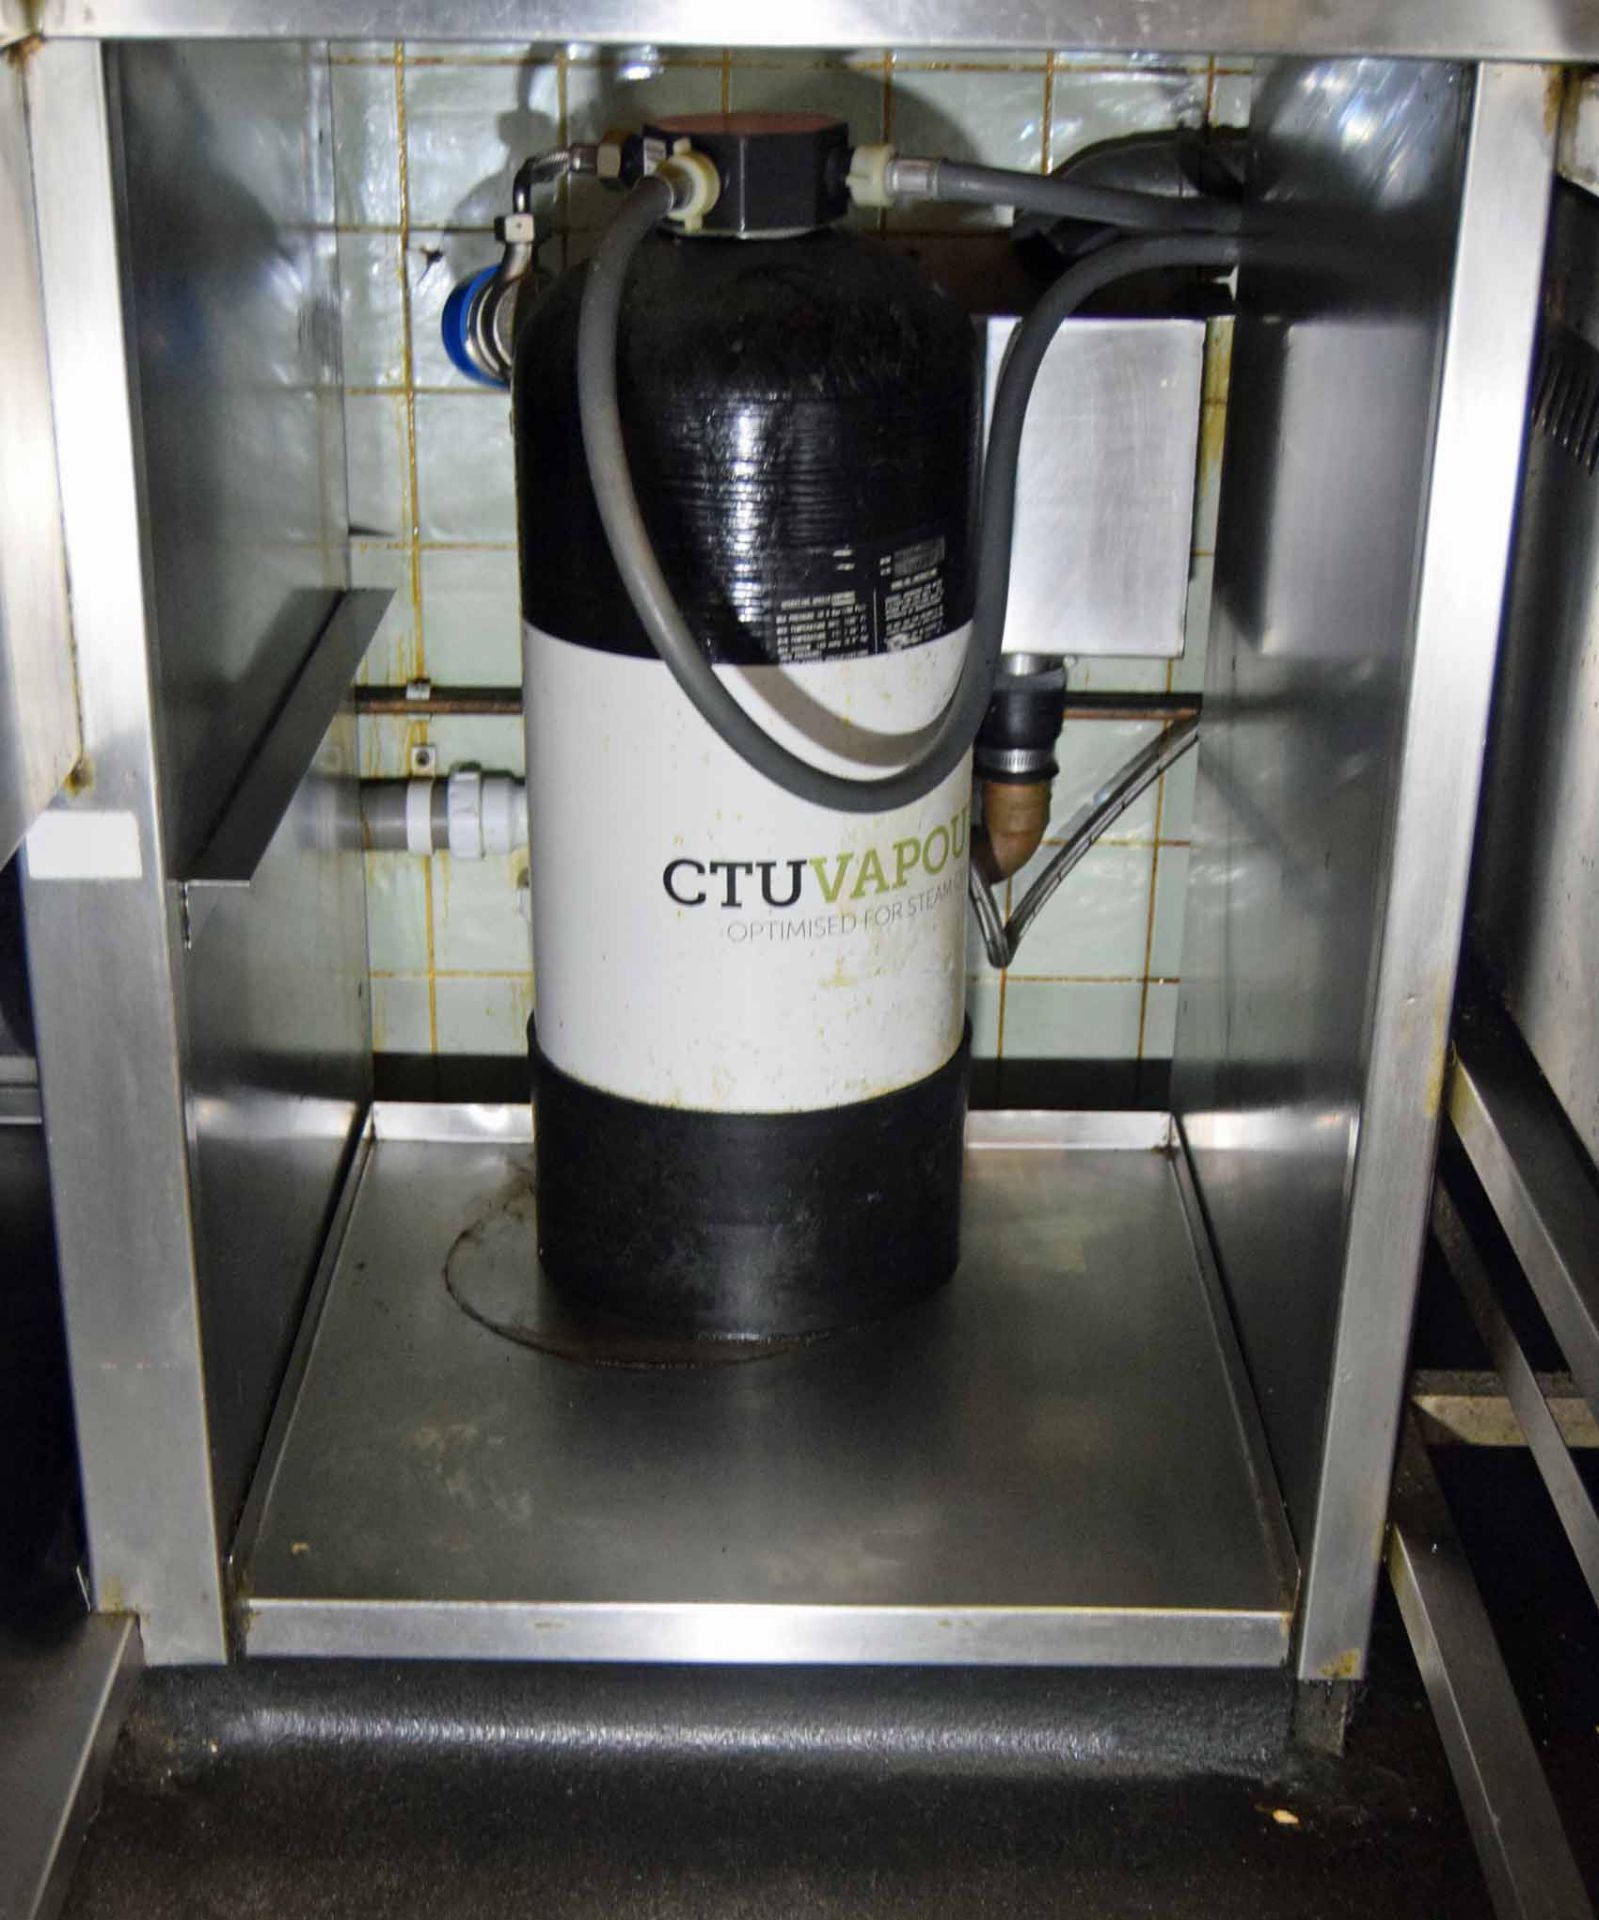 A RATIONAL Combi Master Plus Combination Steam Oven with a CTU VAPOUR Water Treatment Unit - Image 2 of 2